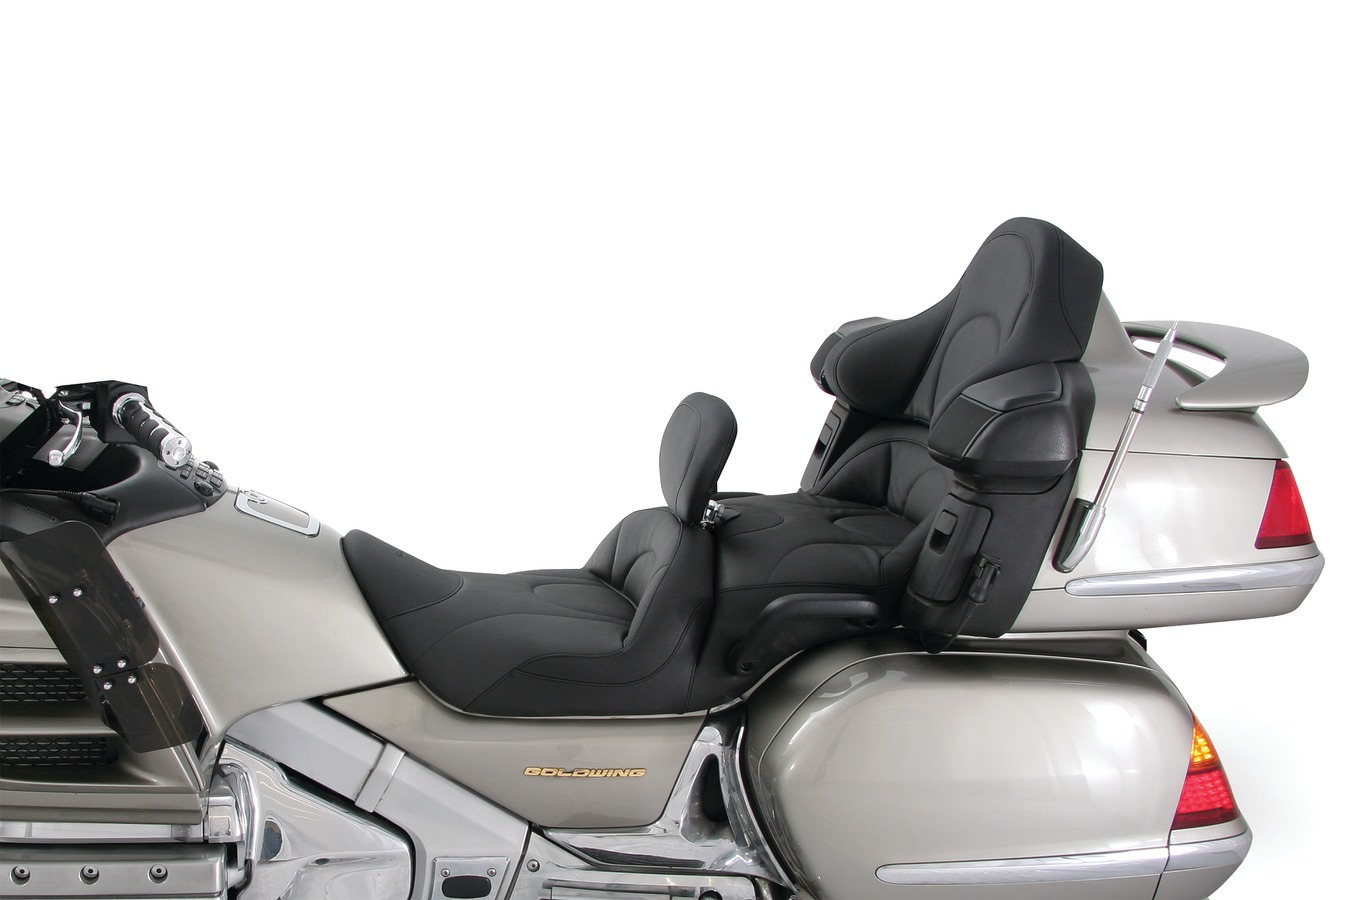 Standard Touring One-Piece Seat for Honda Gold Wing GL1800 2001-’17, Original, Black